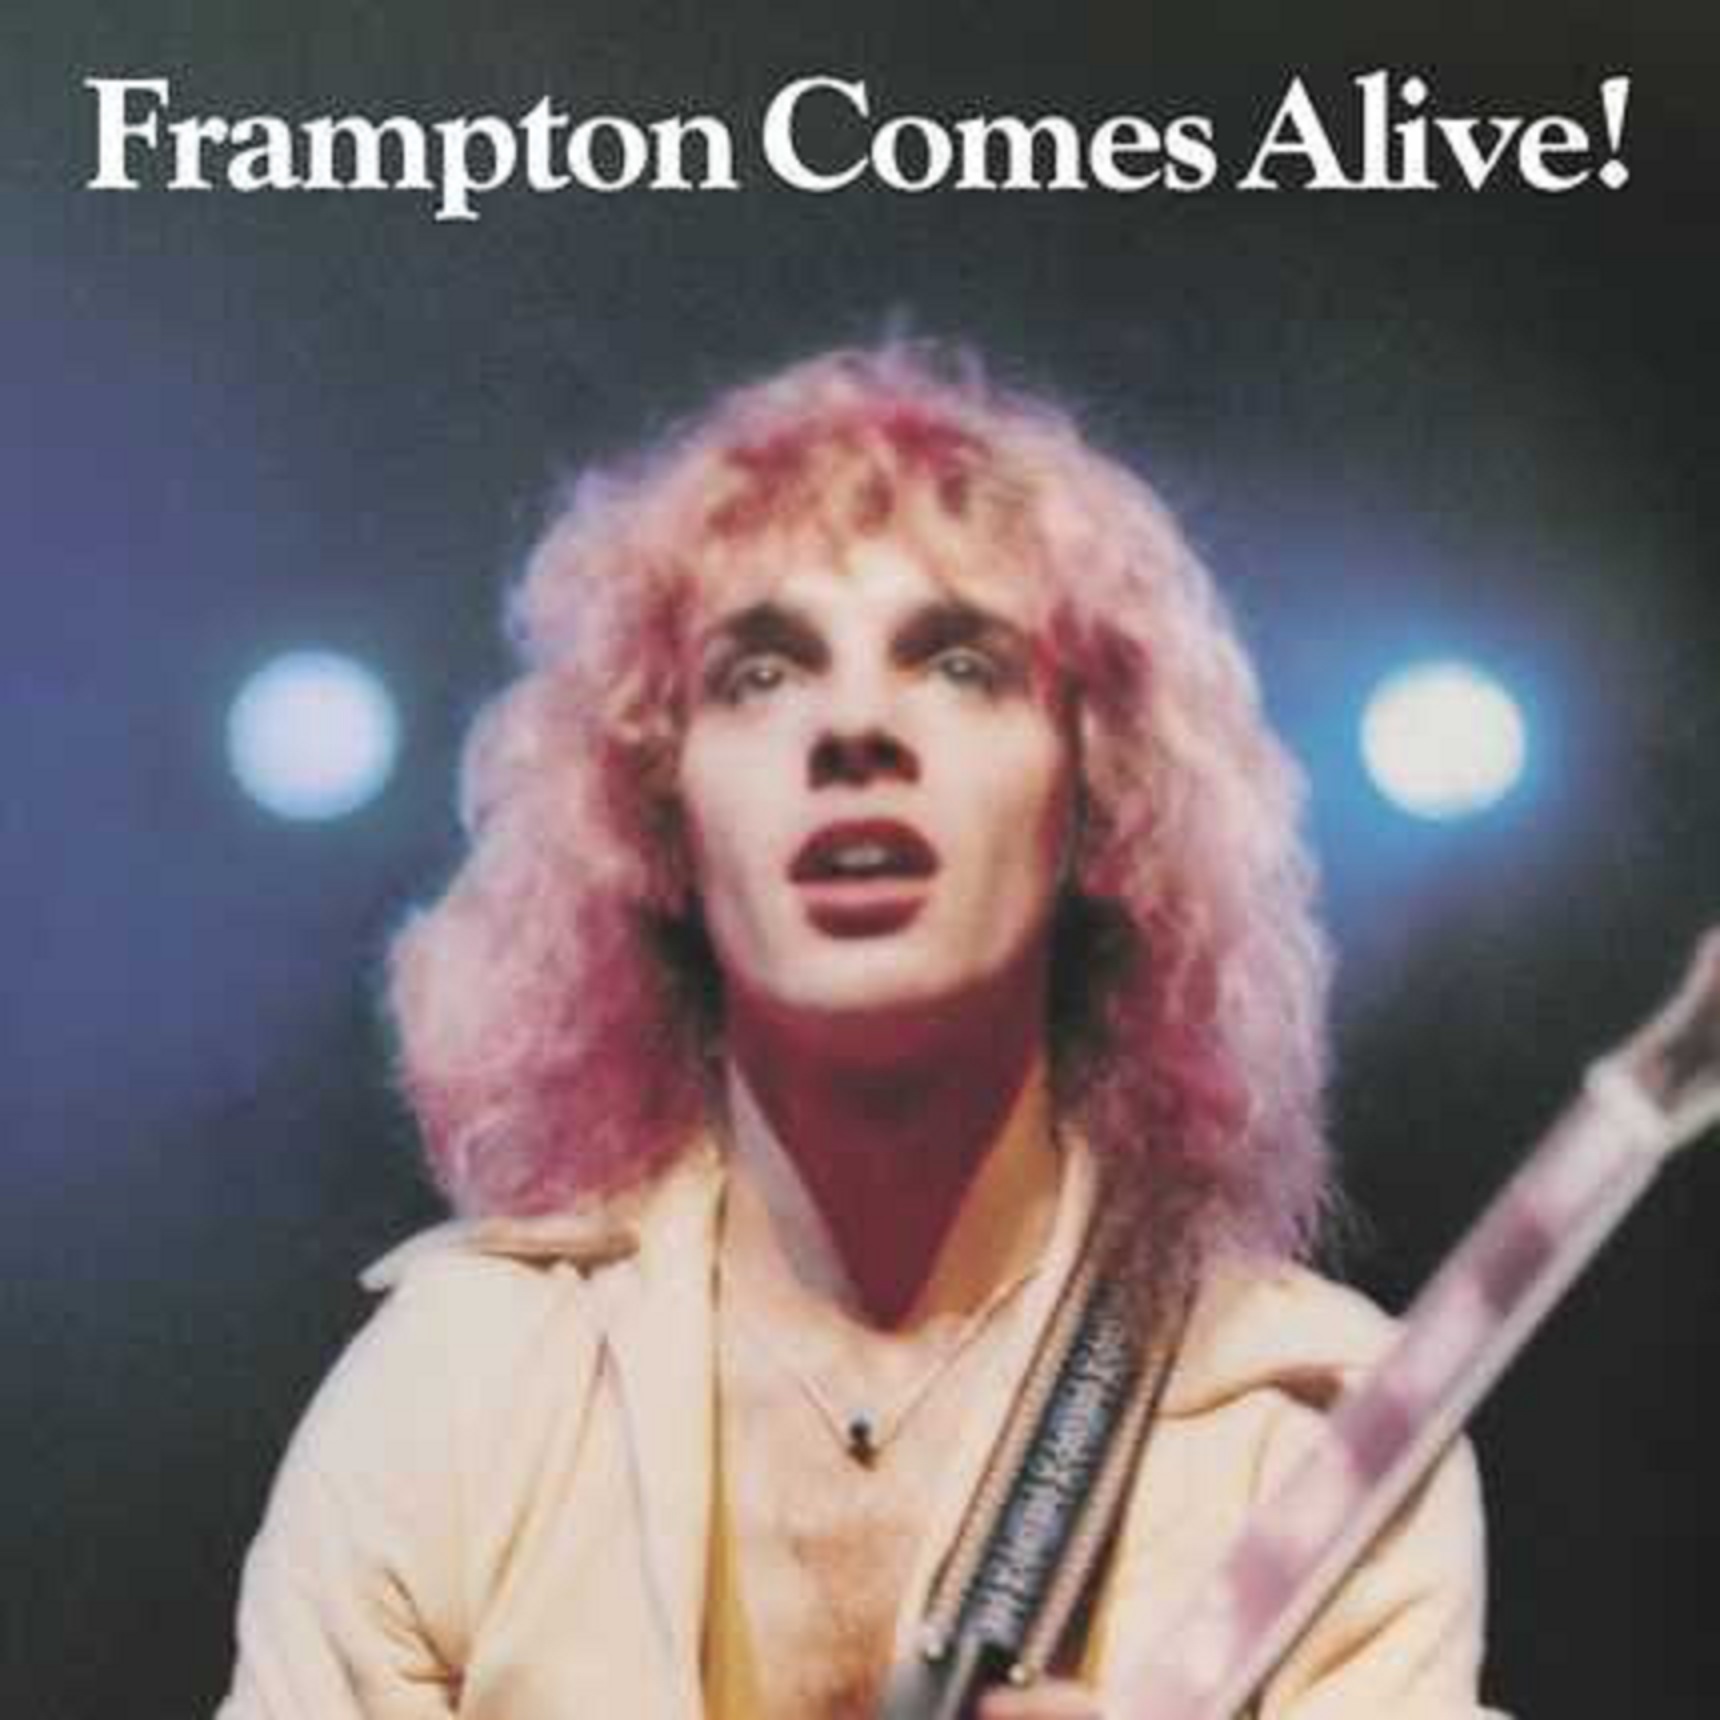 Peter Frampton's live classic "Frampton Comes Alive!" now available to experience in Dolby Atmos